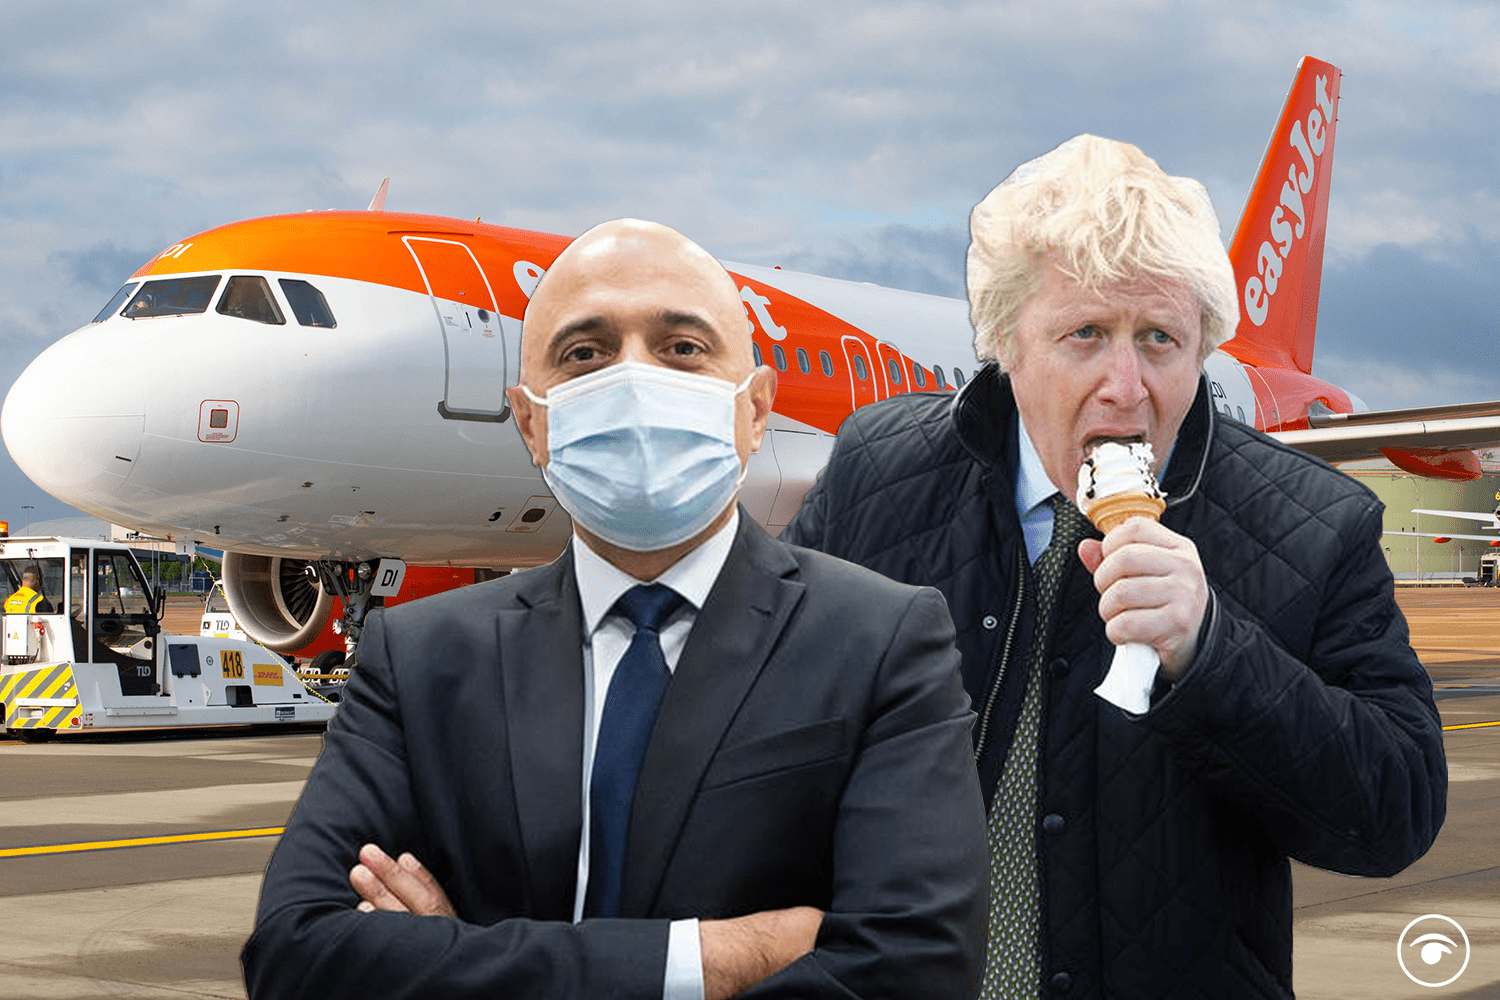 ‘Johnson Variant’ trends again as cases soar and UK flights get banned